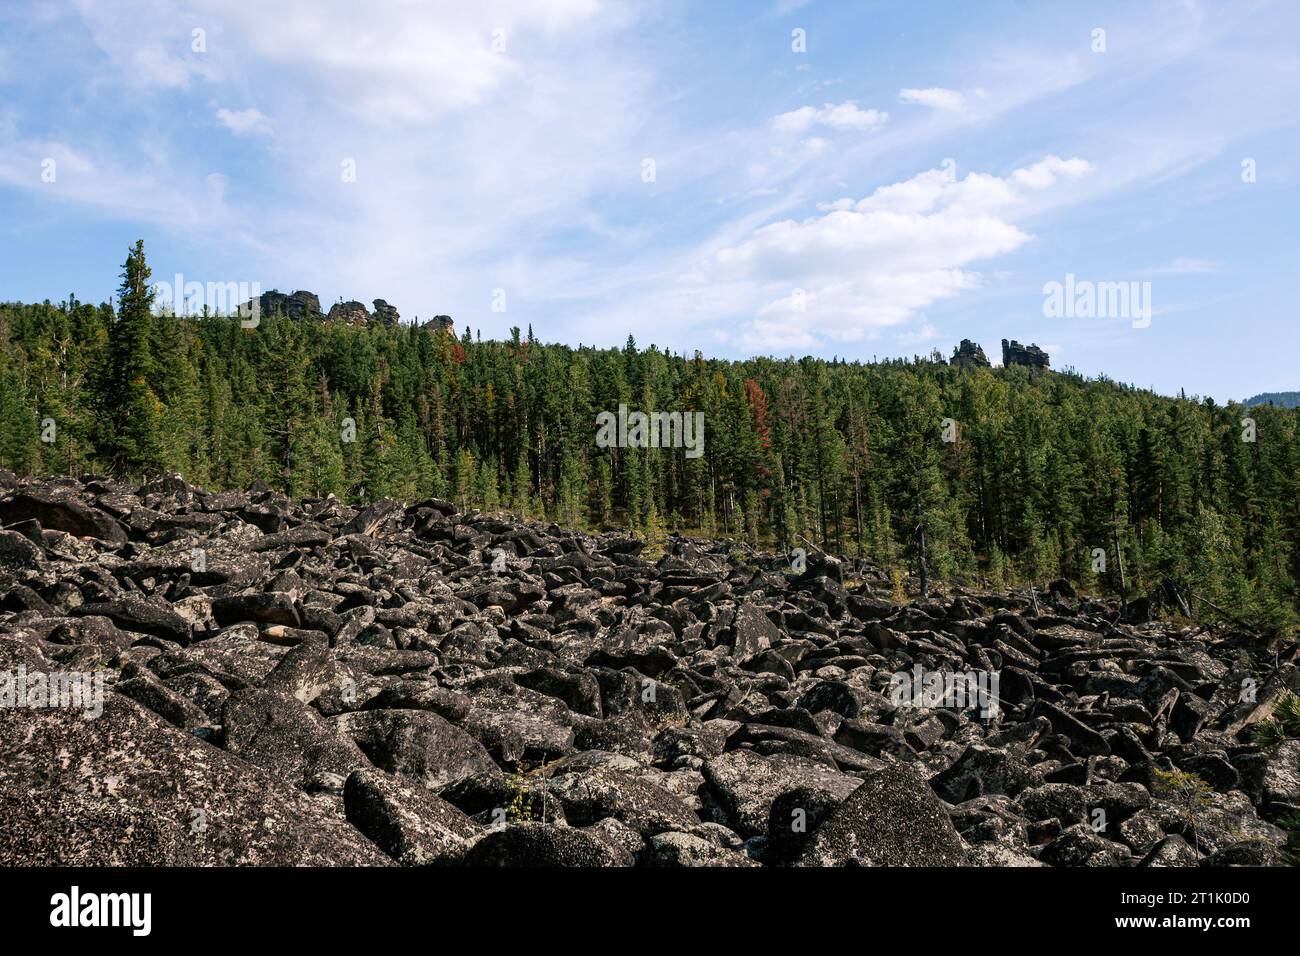 Natural summer landscape. Many igneous rock stones, evergreen coniferous forest, rocks in the distance and blue sky. Hiking through difficult terrain Stock Photo